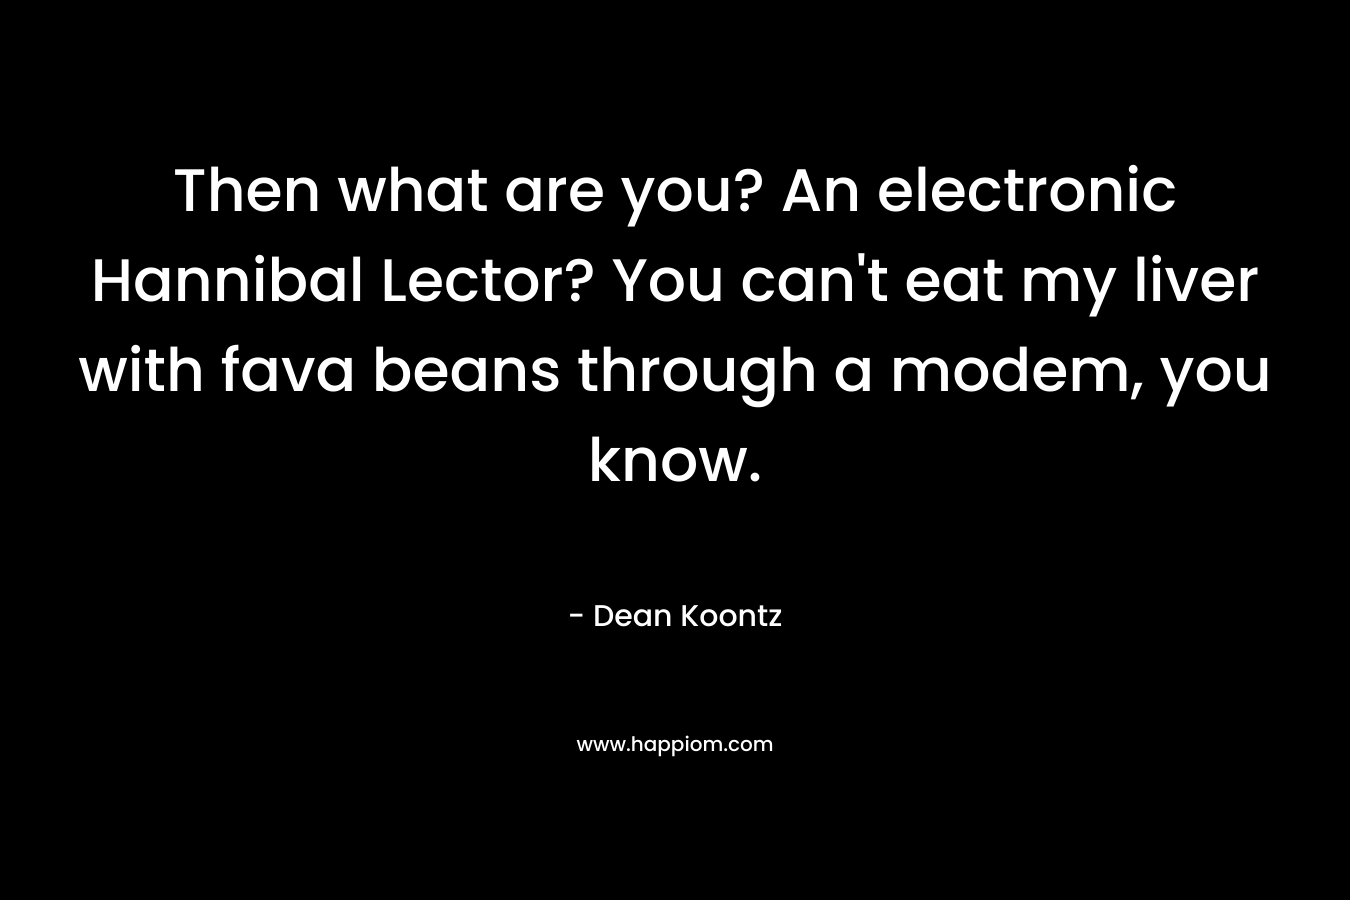 Then what are you? An electronic Hannibal Lector? You can't eat my liver with fava beans through a modem, you know.